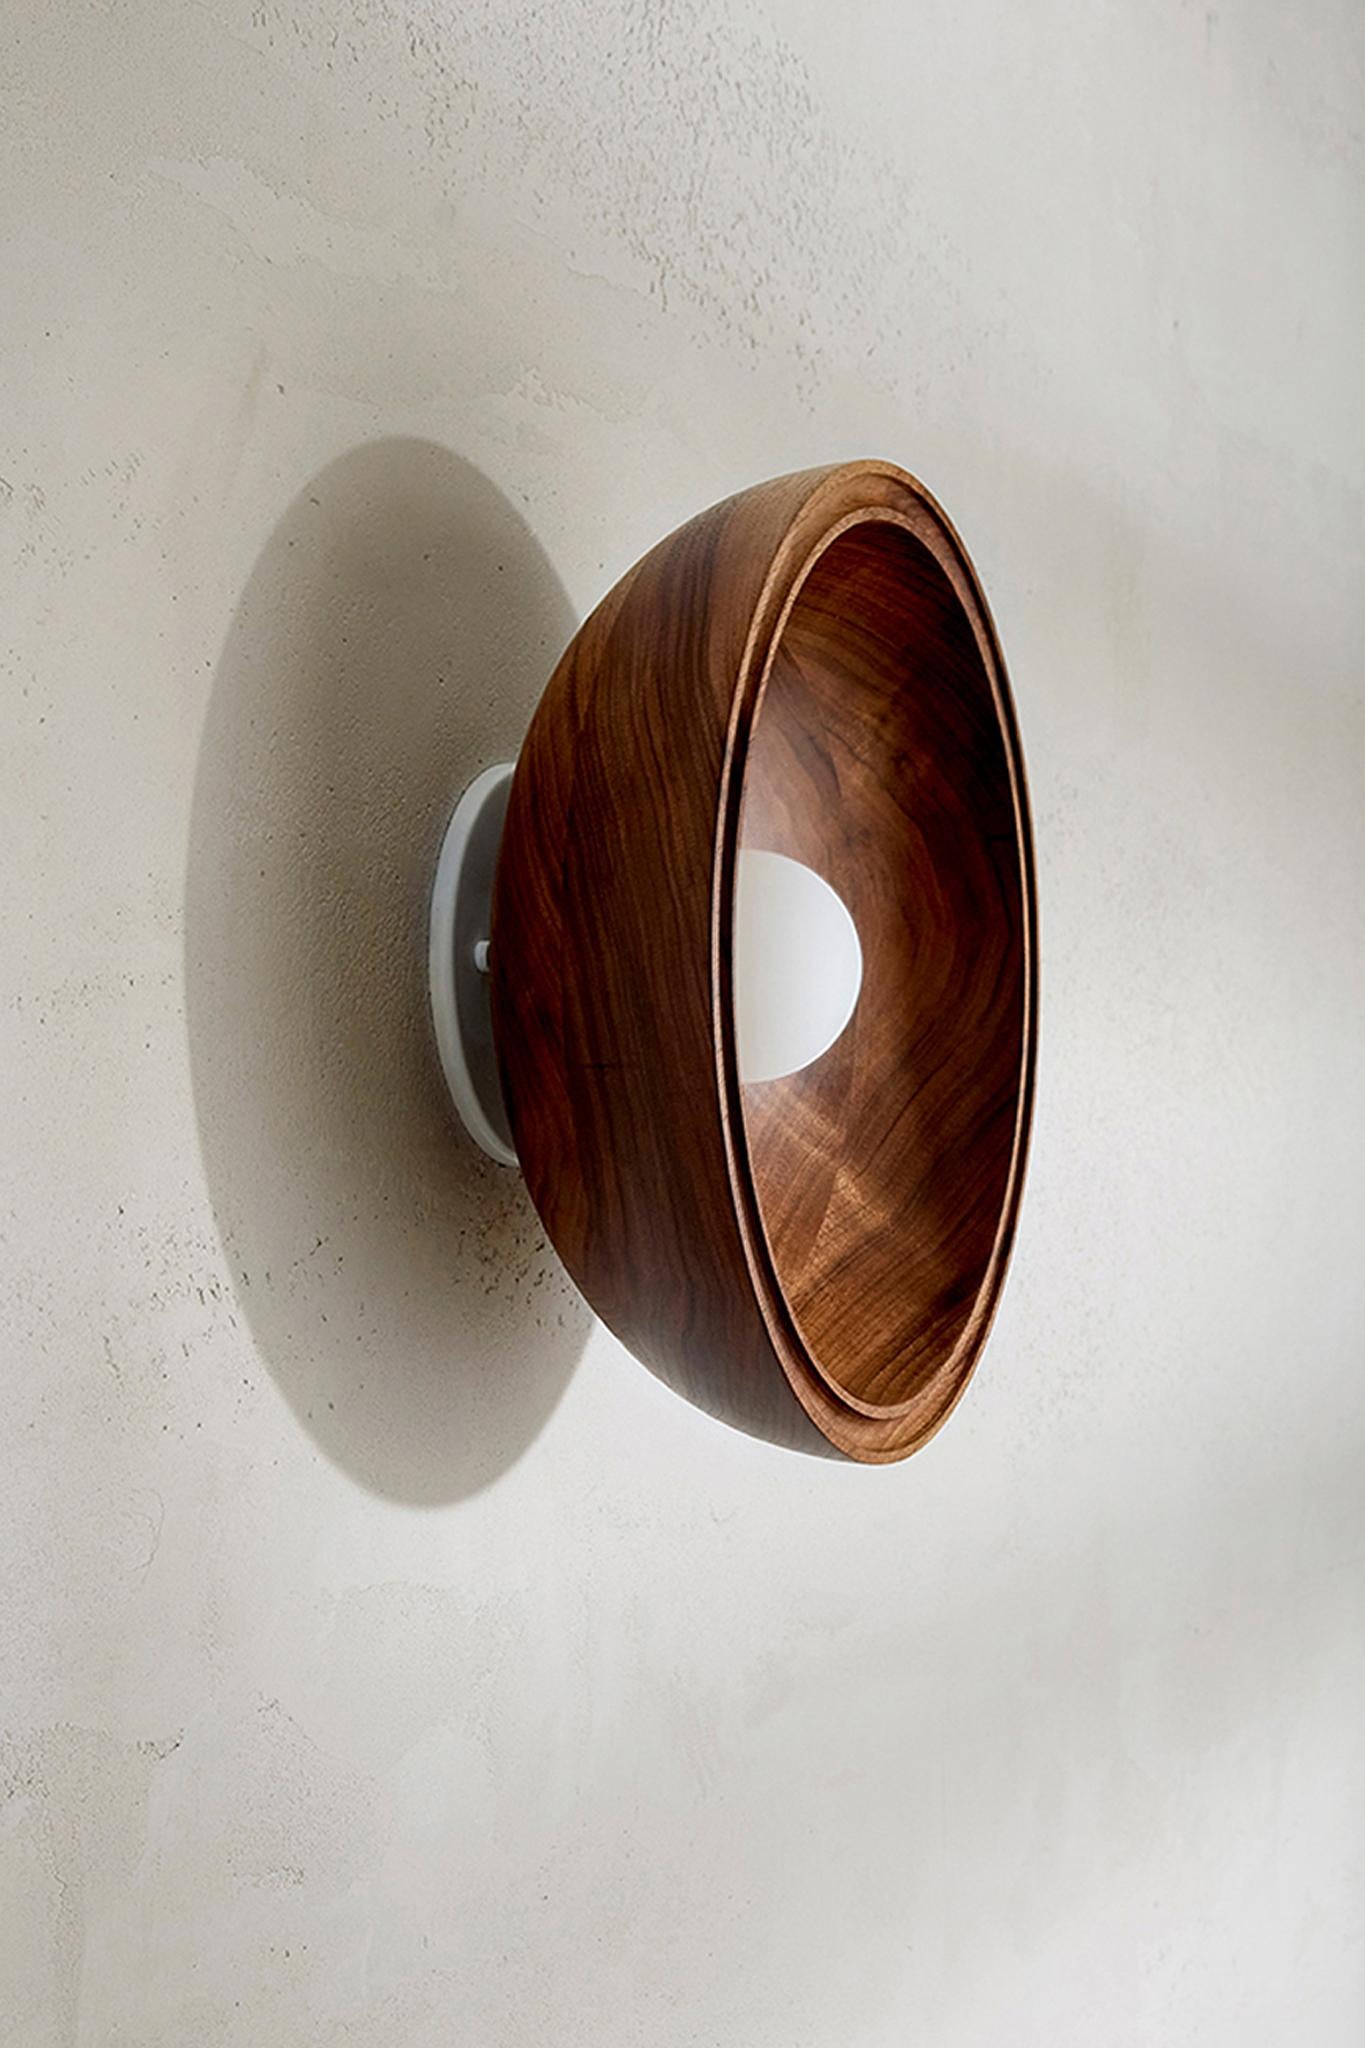 The Selene Surface Sconce has been inversely repurposed from the FSC-certified timber of our Terra 00 range. Suitable as a wall light or ceiling light in both residential and commercial projects, the Selene Surface Sconce offers a tactile warmth and